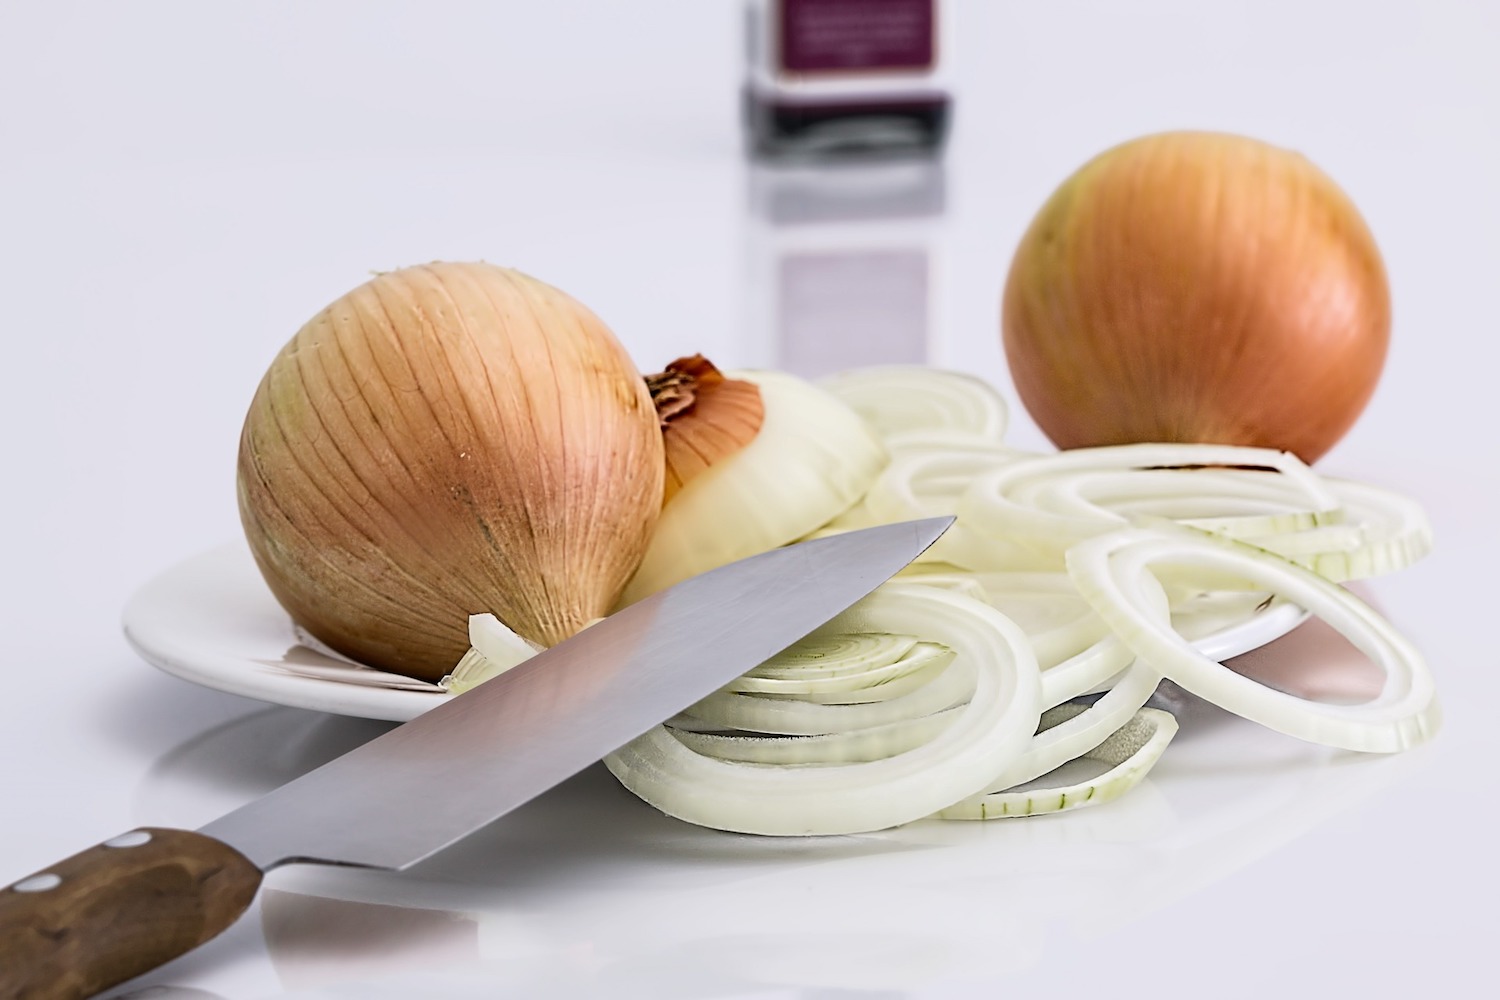 Whole and sliced onions